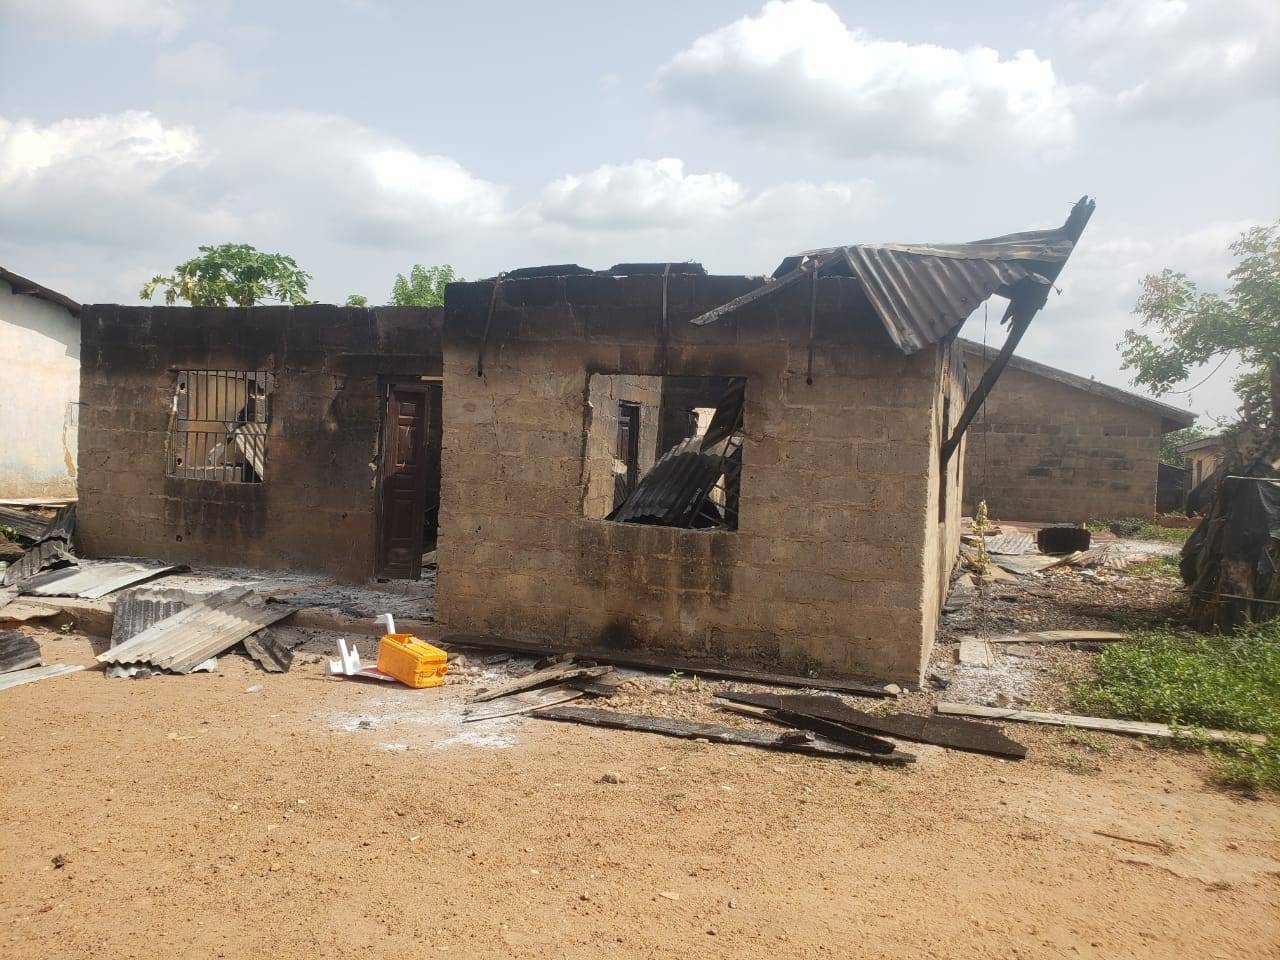 Ekiti Islamic cleric allegedly sets his wife?s house ablaze for refusing to participate in late night prayer